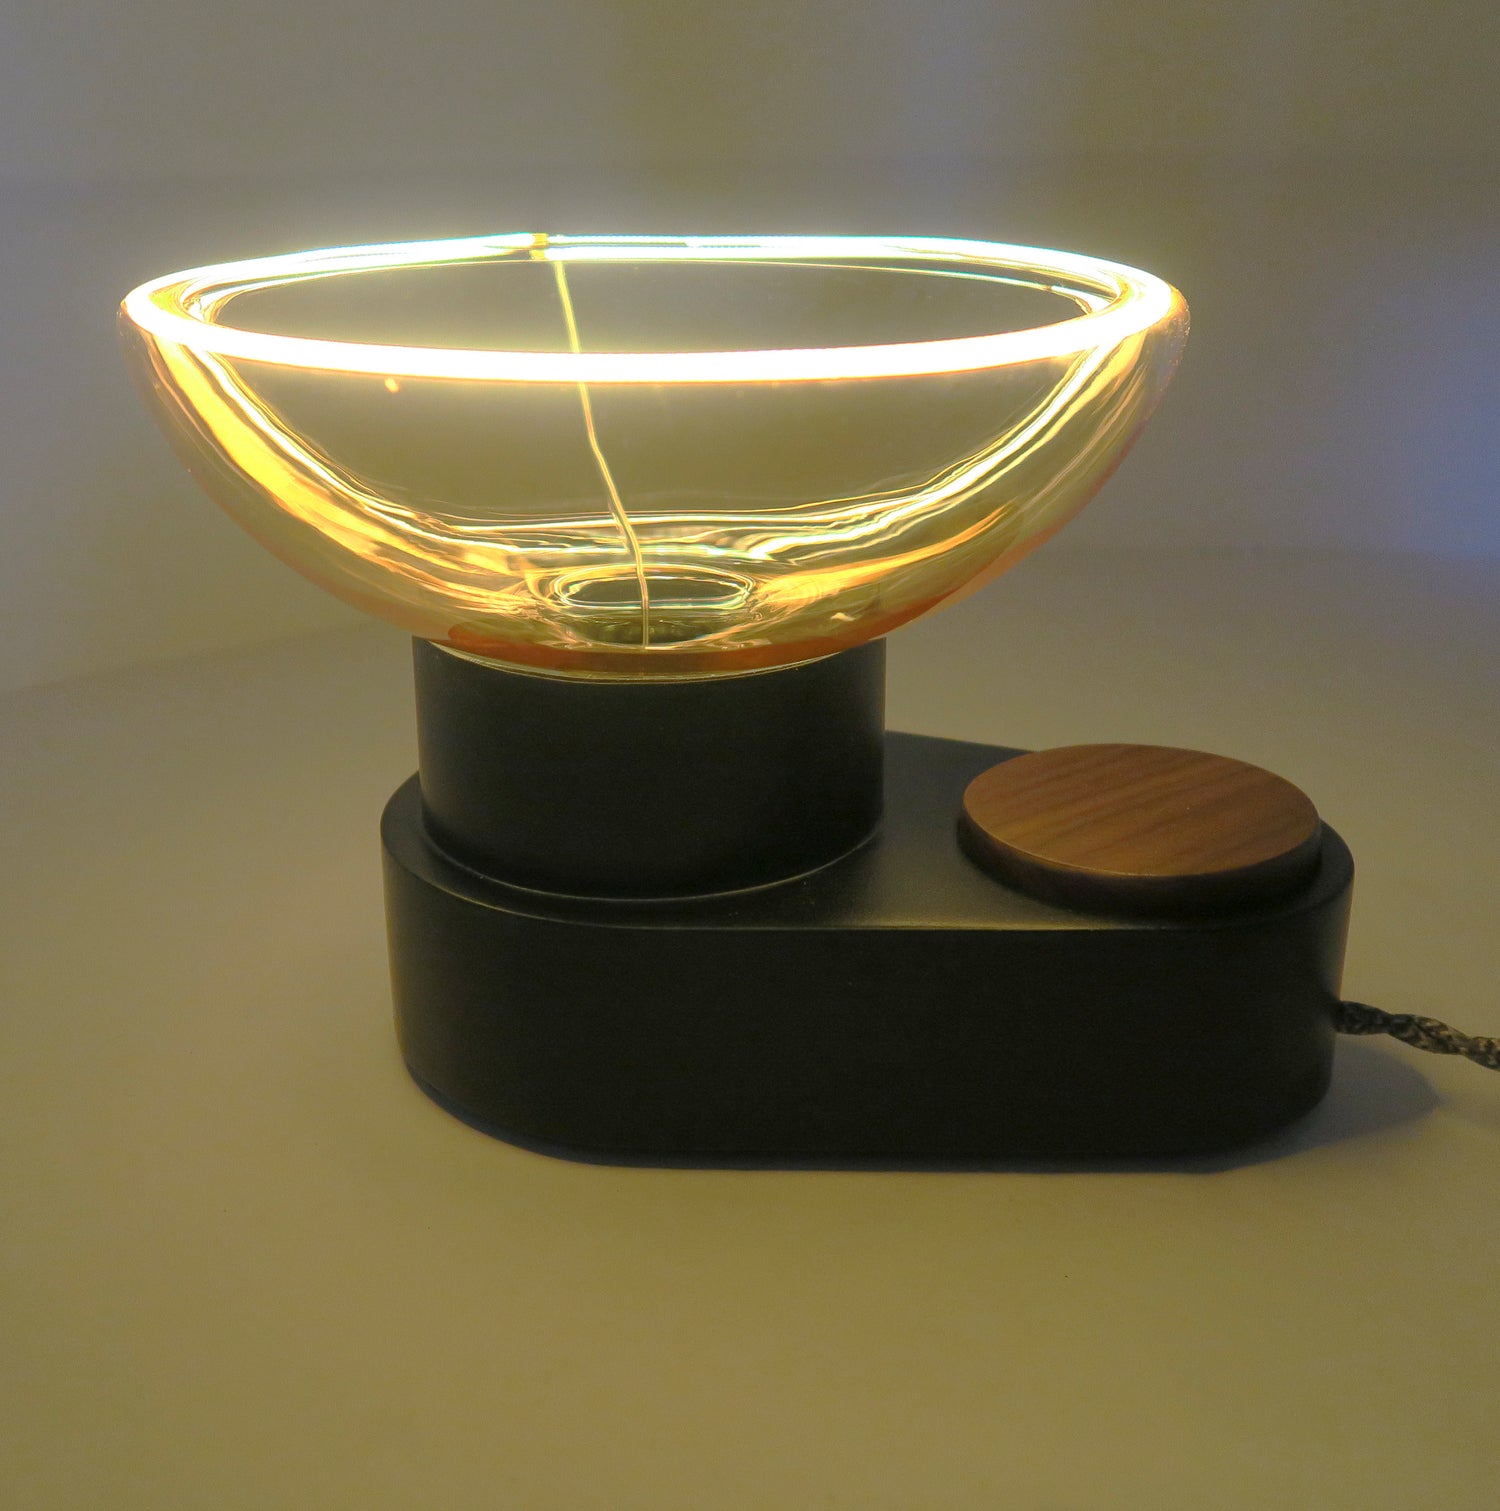 LED modern Lamp  Oval - wood lamp with dimmer - European look lighting - unique light - original Lighting - Unique LED Bulb - Choice of Knob